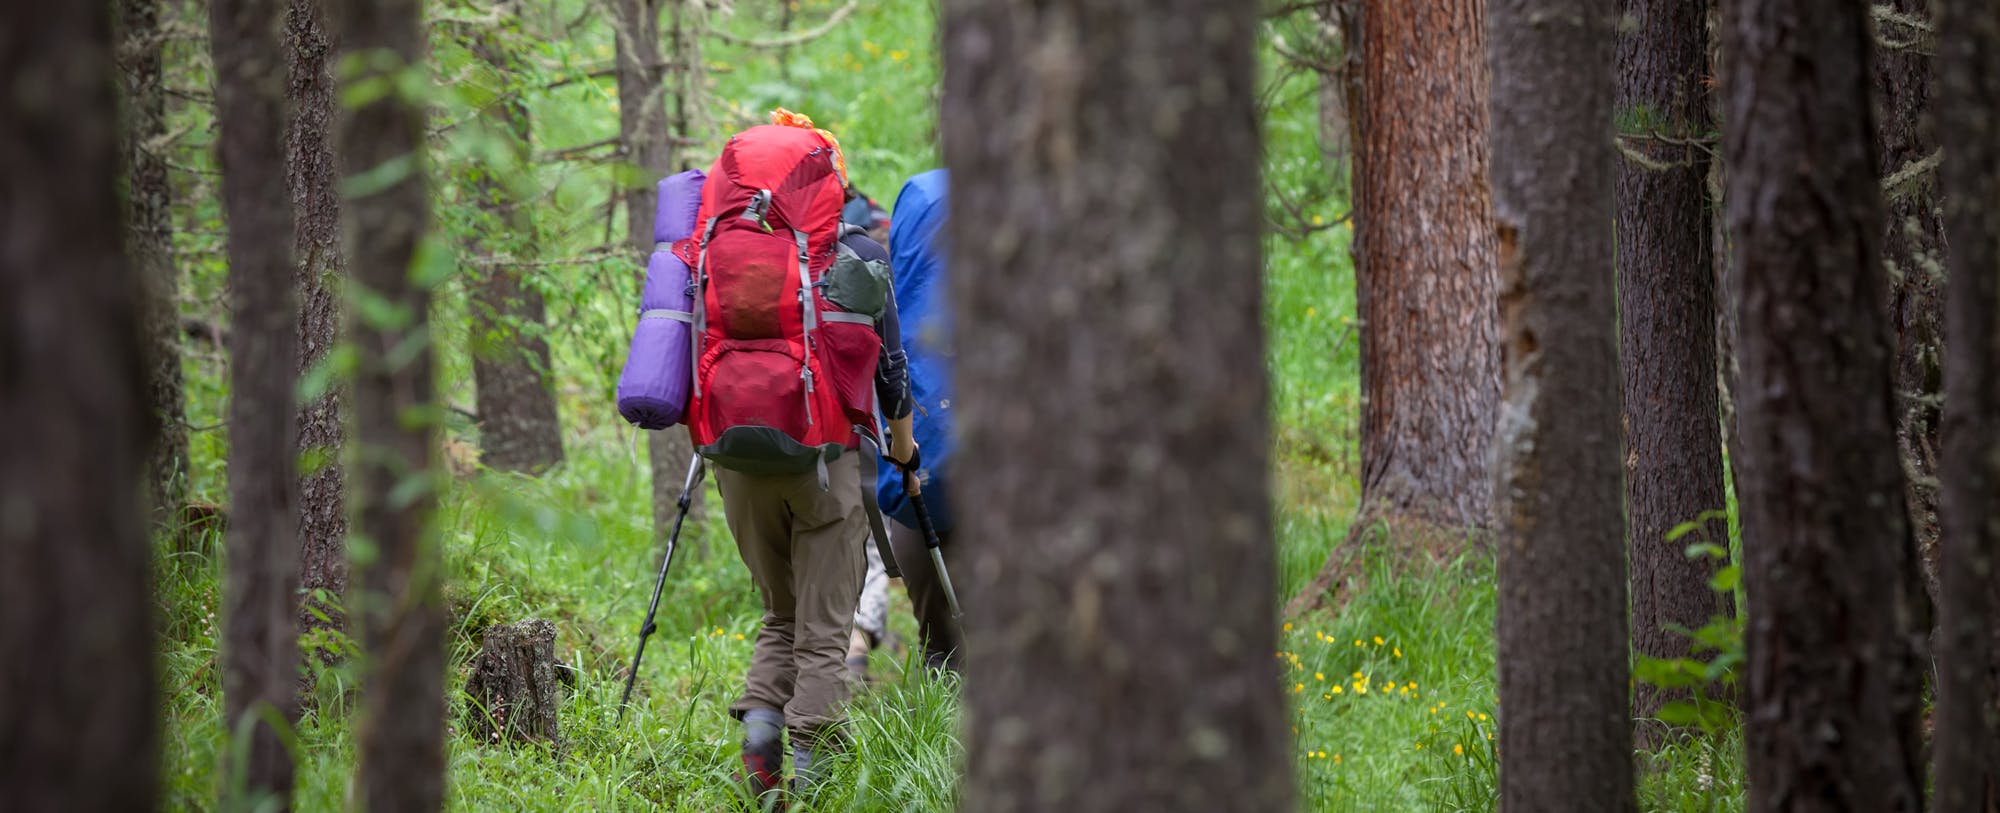 Value Priced Backpacking Gear: Hitting the Trail for Under $500